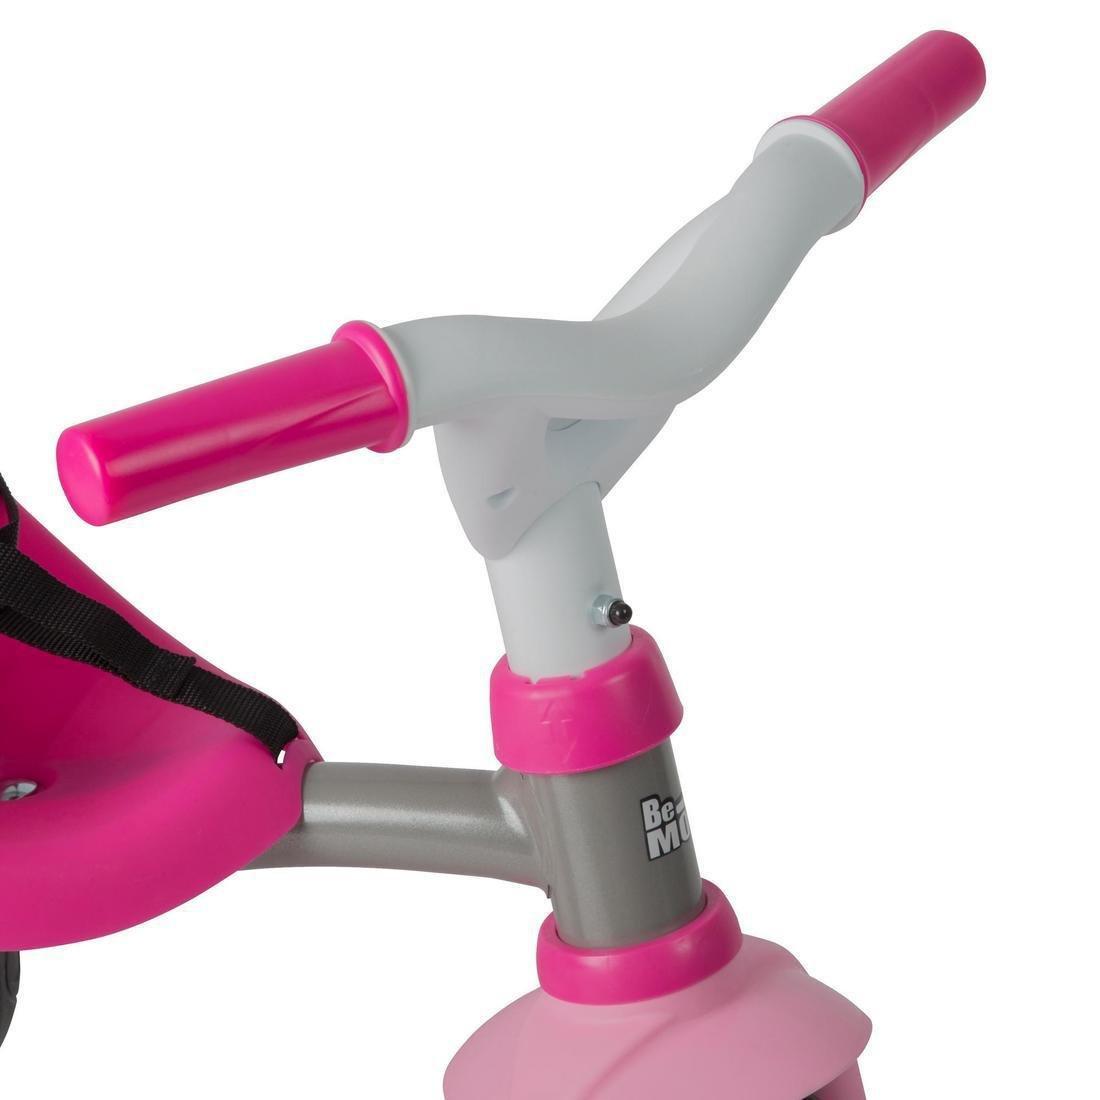 SMOBY - 12 Be Move Kids' Tricycle, Pink